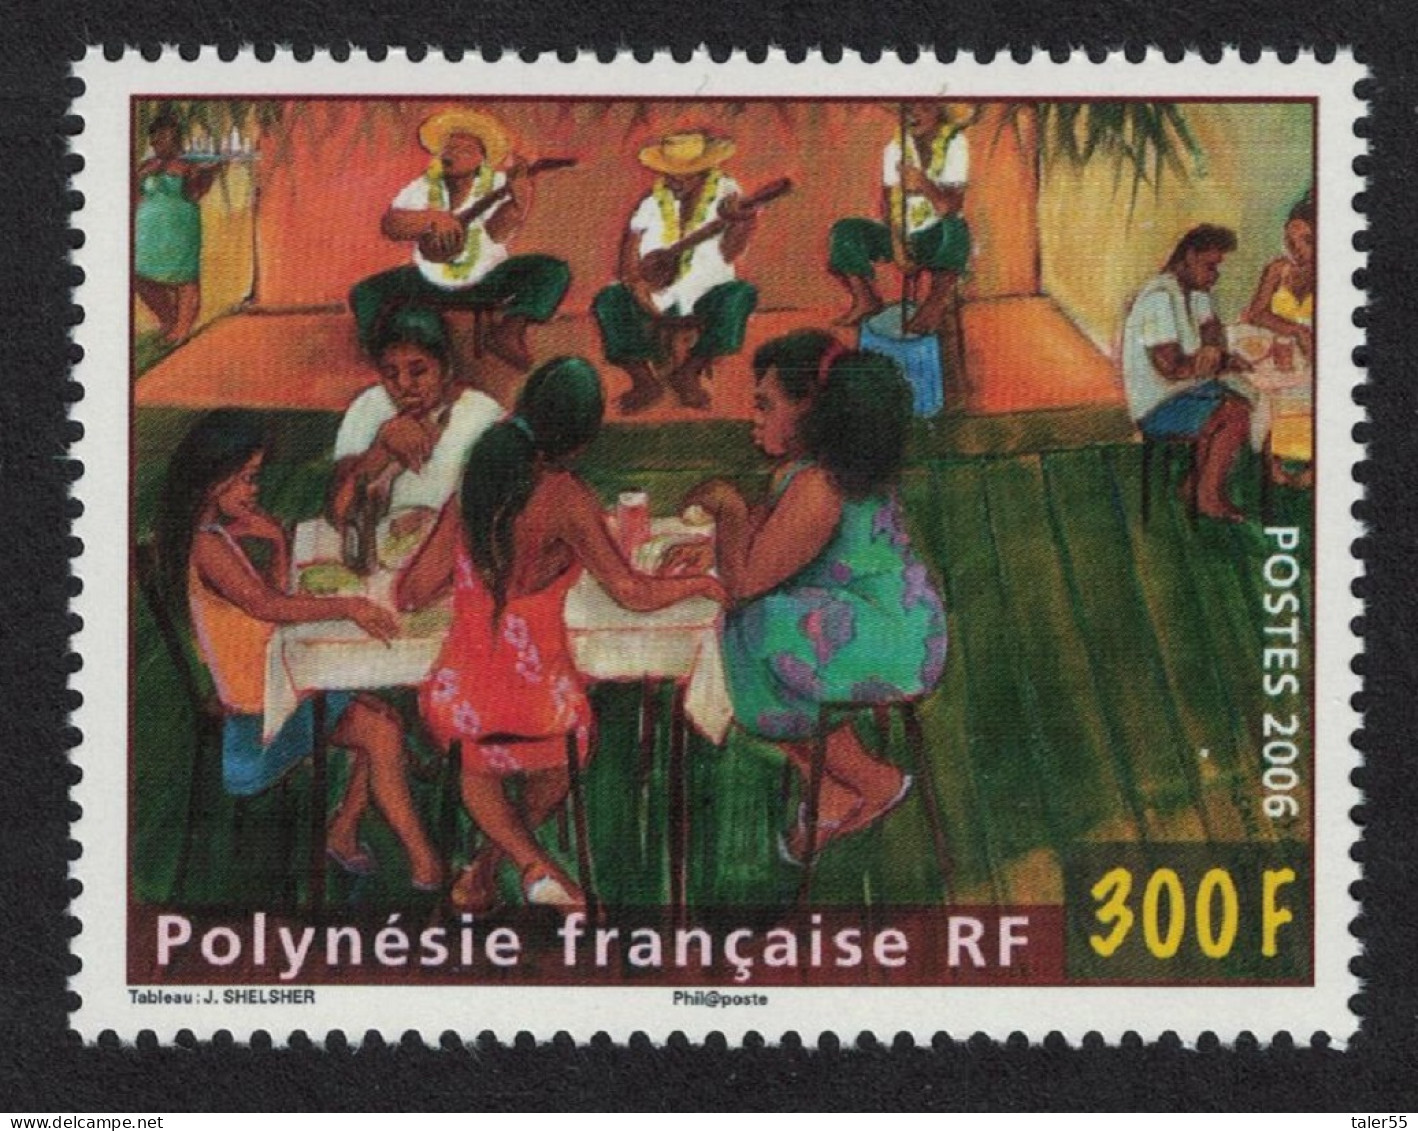 Fr. Polynesia Painting 'Women And Musicians' 300f 2006 MNH SG#1026 - Ungebraucht